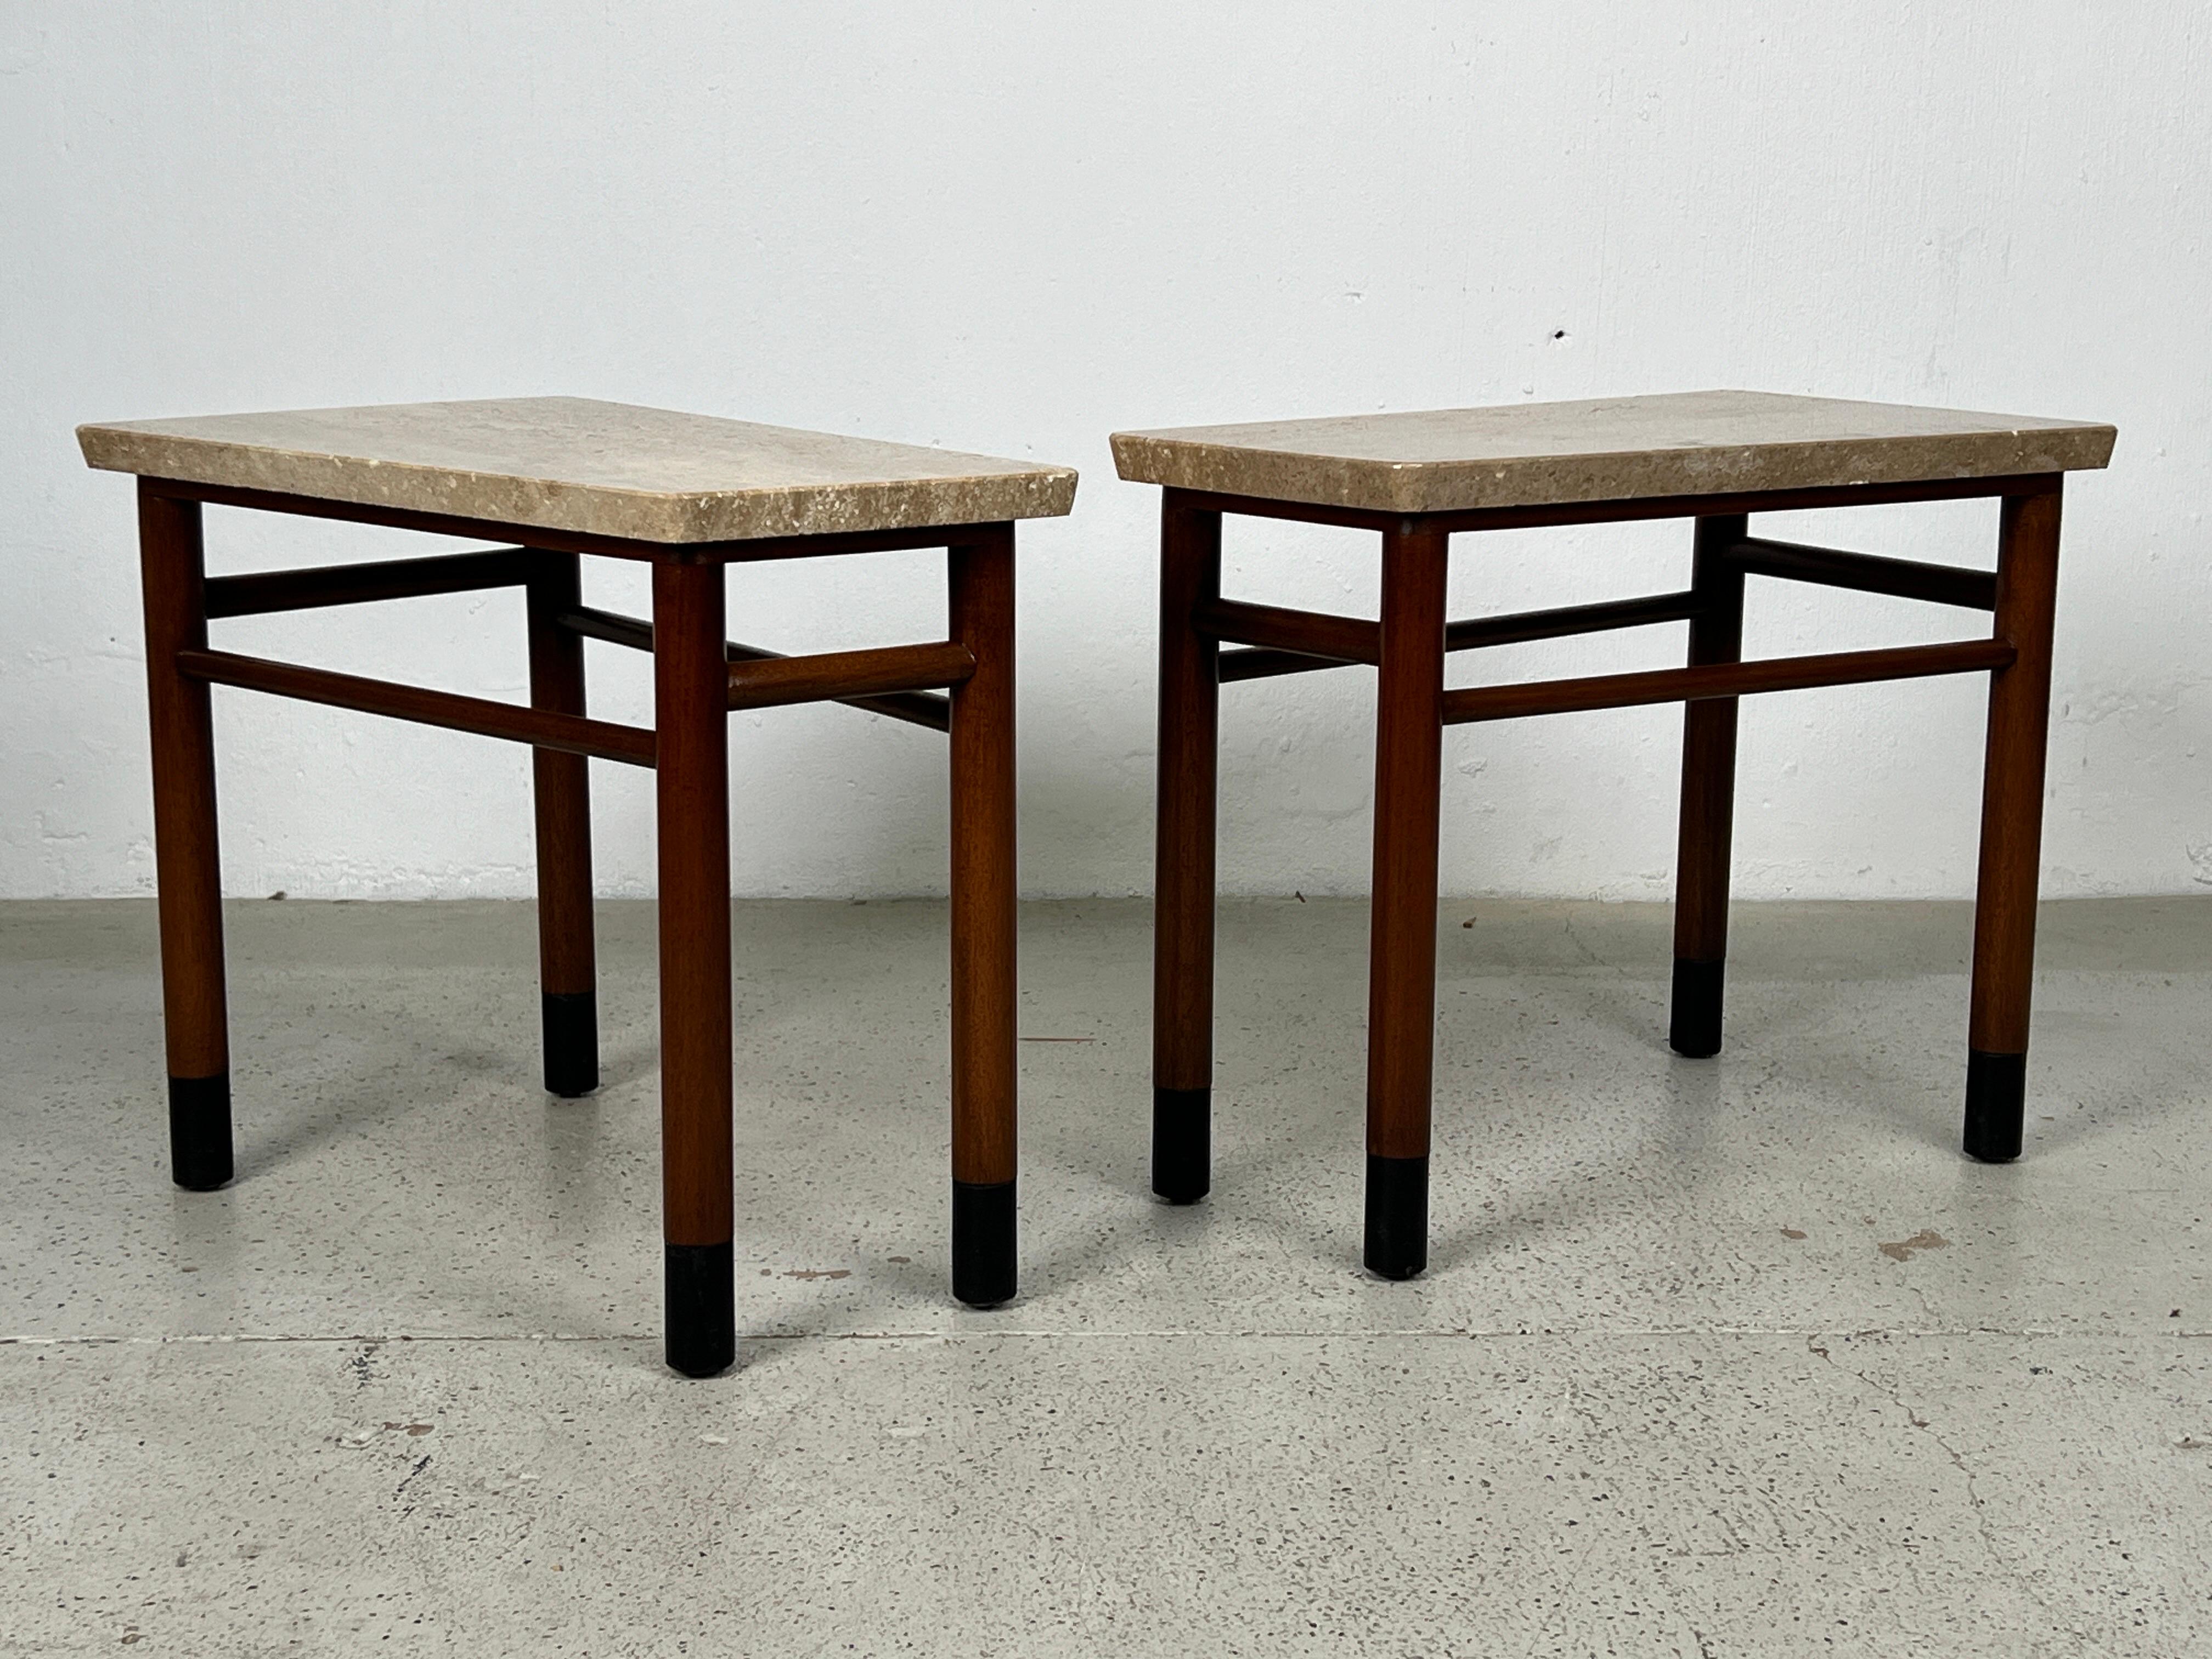 Pair of Wedge Shaped Travertine Tables by Edward Wormley for Dunbar For Sale 12